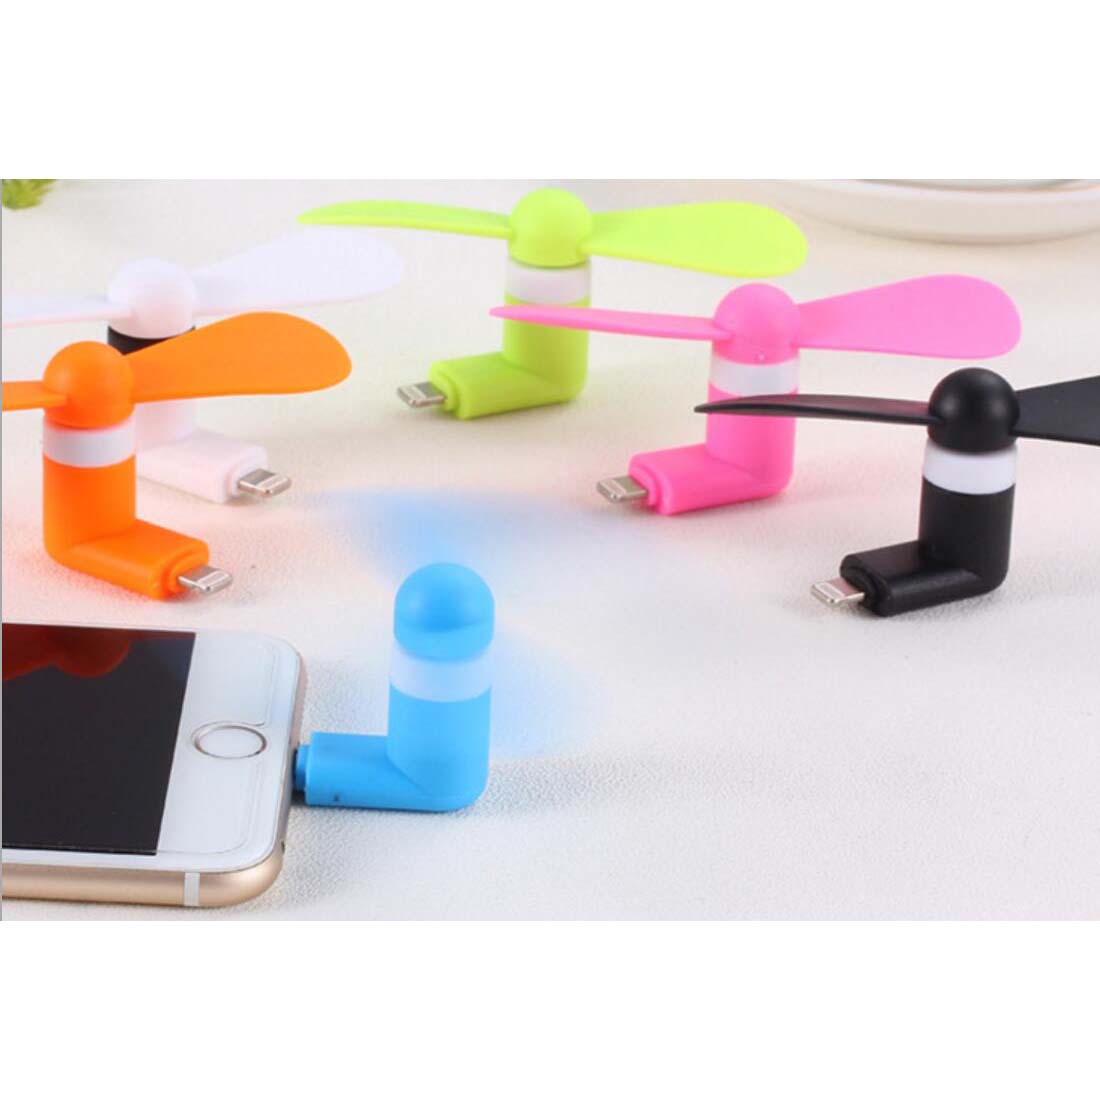 Mobile Phone mini fan for iphone